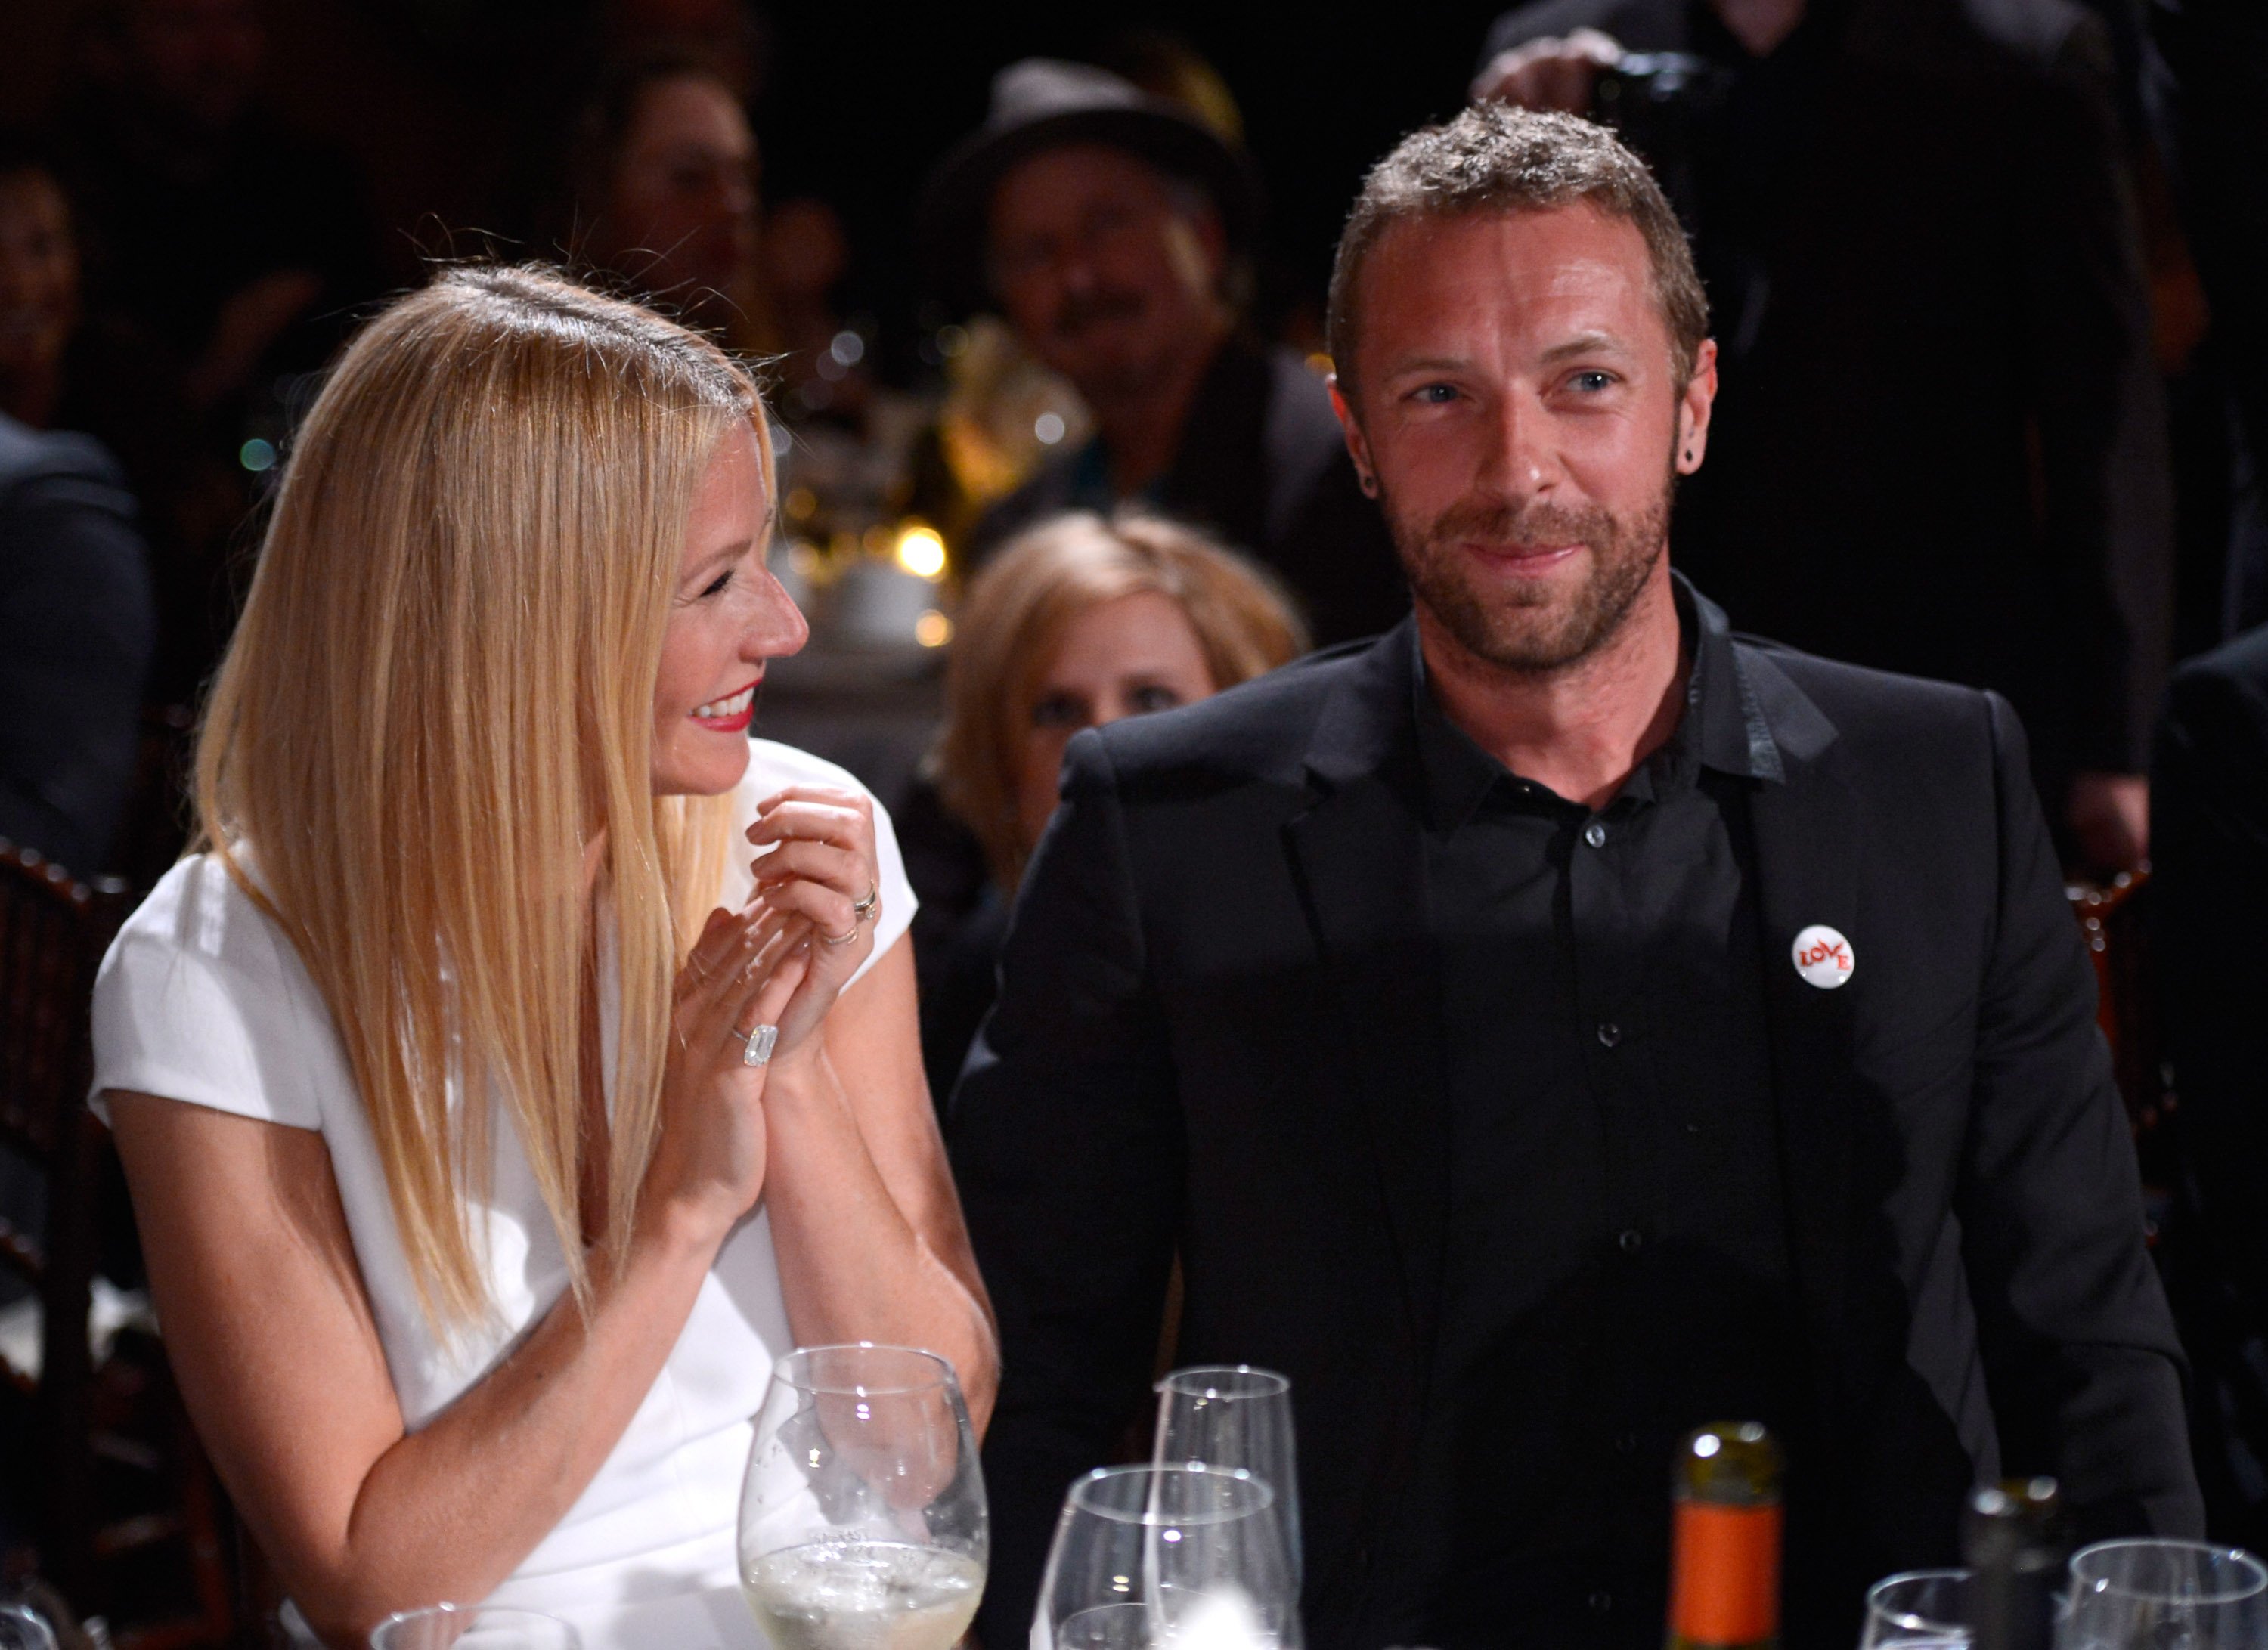 Gwyneth Paltrow and Chris Martin attending the 3rd annual Sean Penn & Friends Help Haiti Home Gala benefiting J/P HRO at Montage Beverly Hills on January 11, 2014 in Beverly Hills, California. / Source: Getty Images